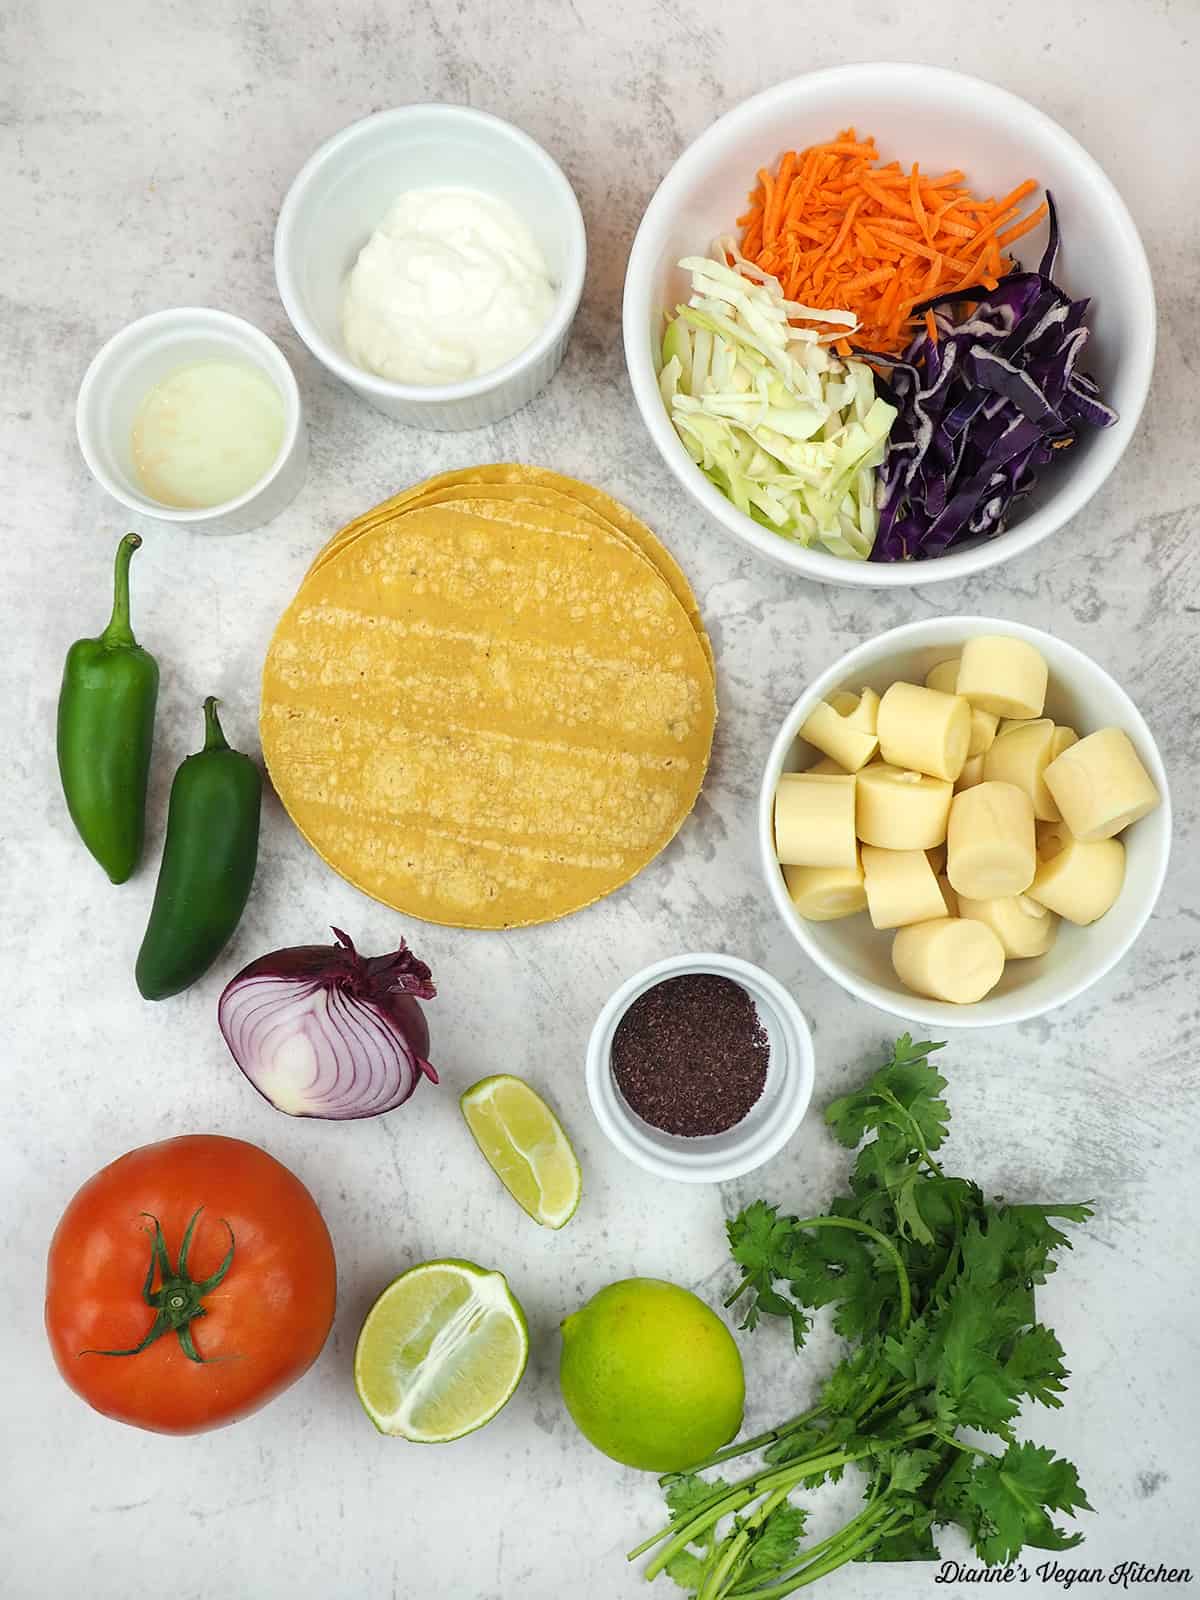 vinegar, vegan mayo, carrots and cabbage, hearts of palm, tortillas, seaweed flakes, jalapeno, tomatoes, onion, limes, and cilantro